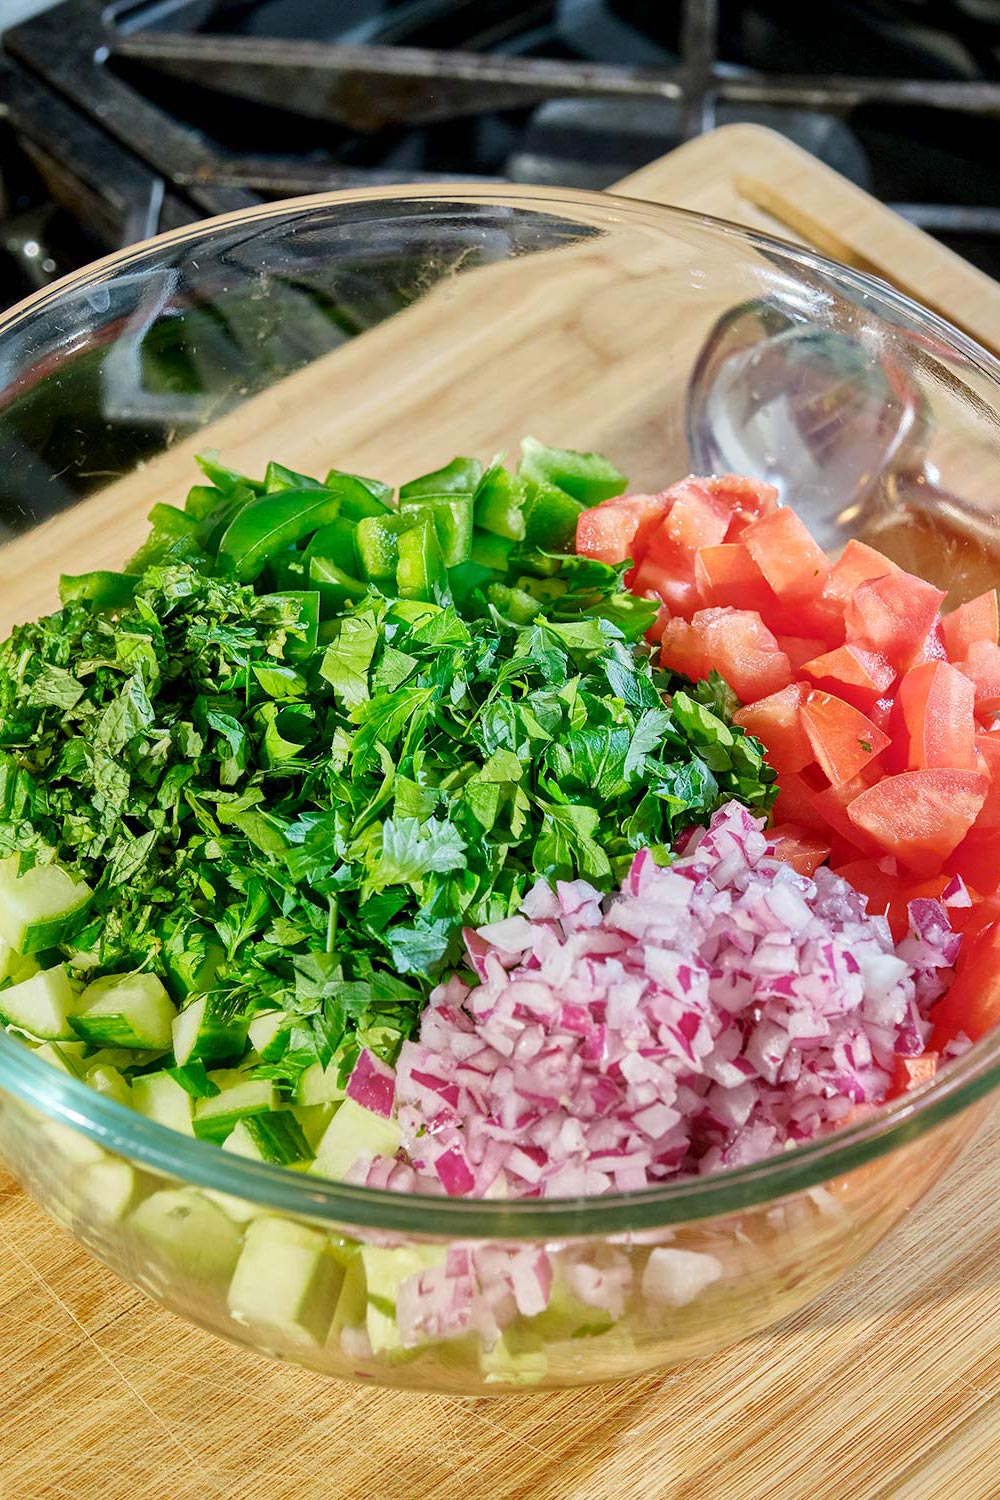 Chopped tomatoes, cucumber, bell pepper, and red onion in glass bowl.